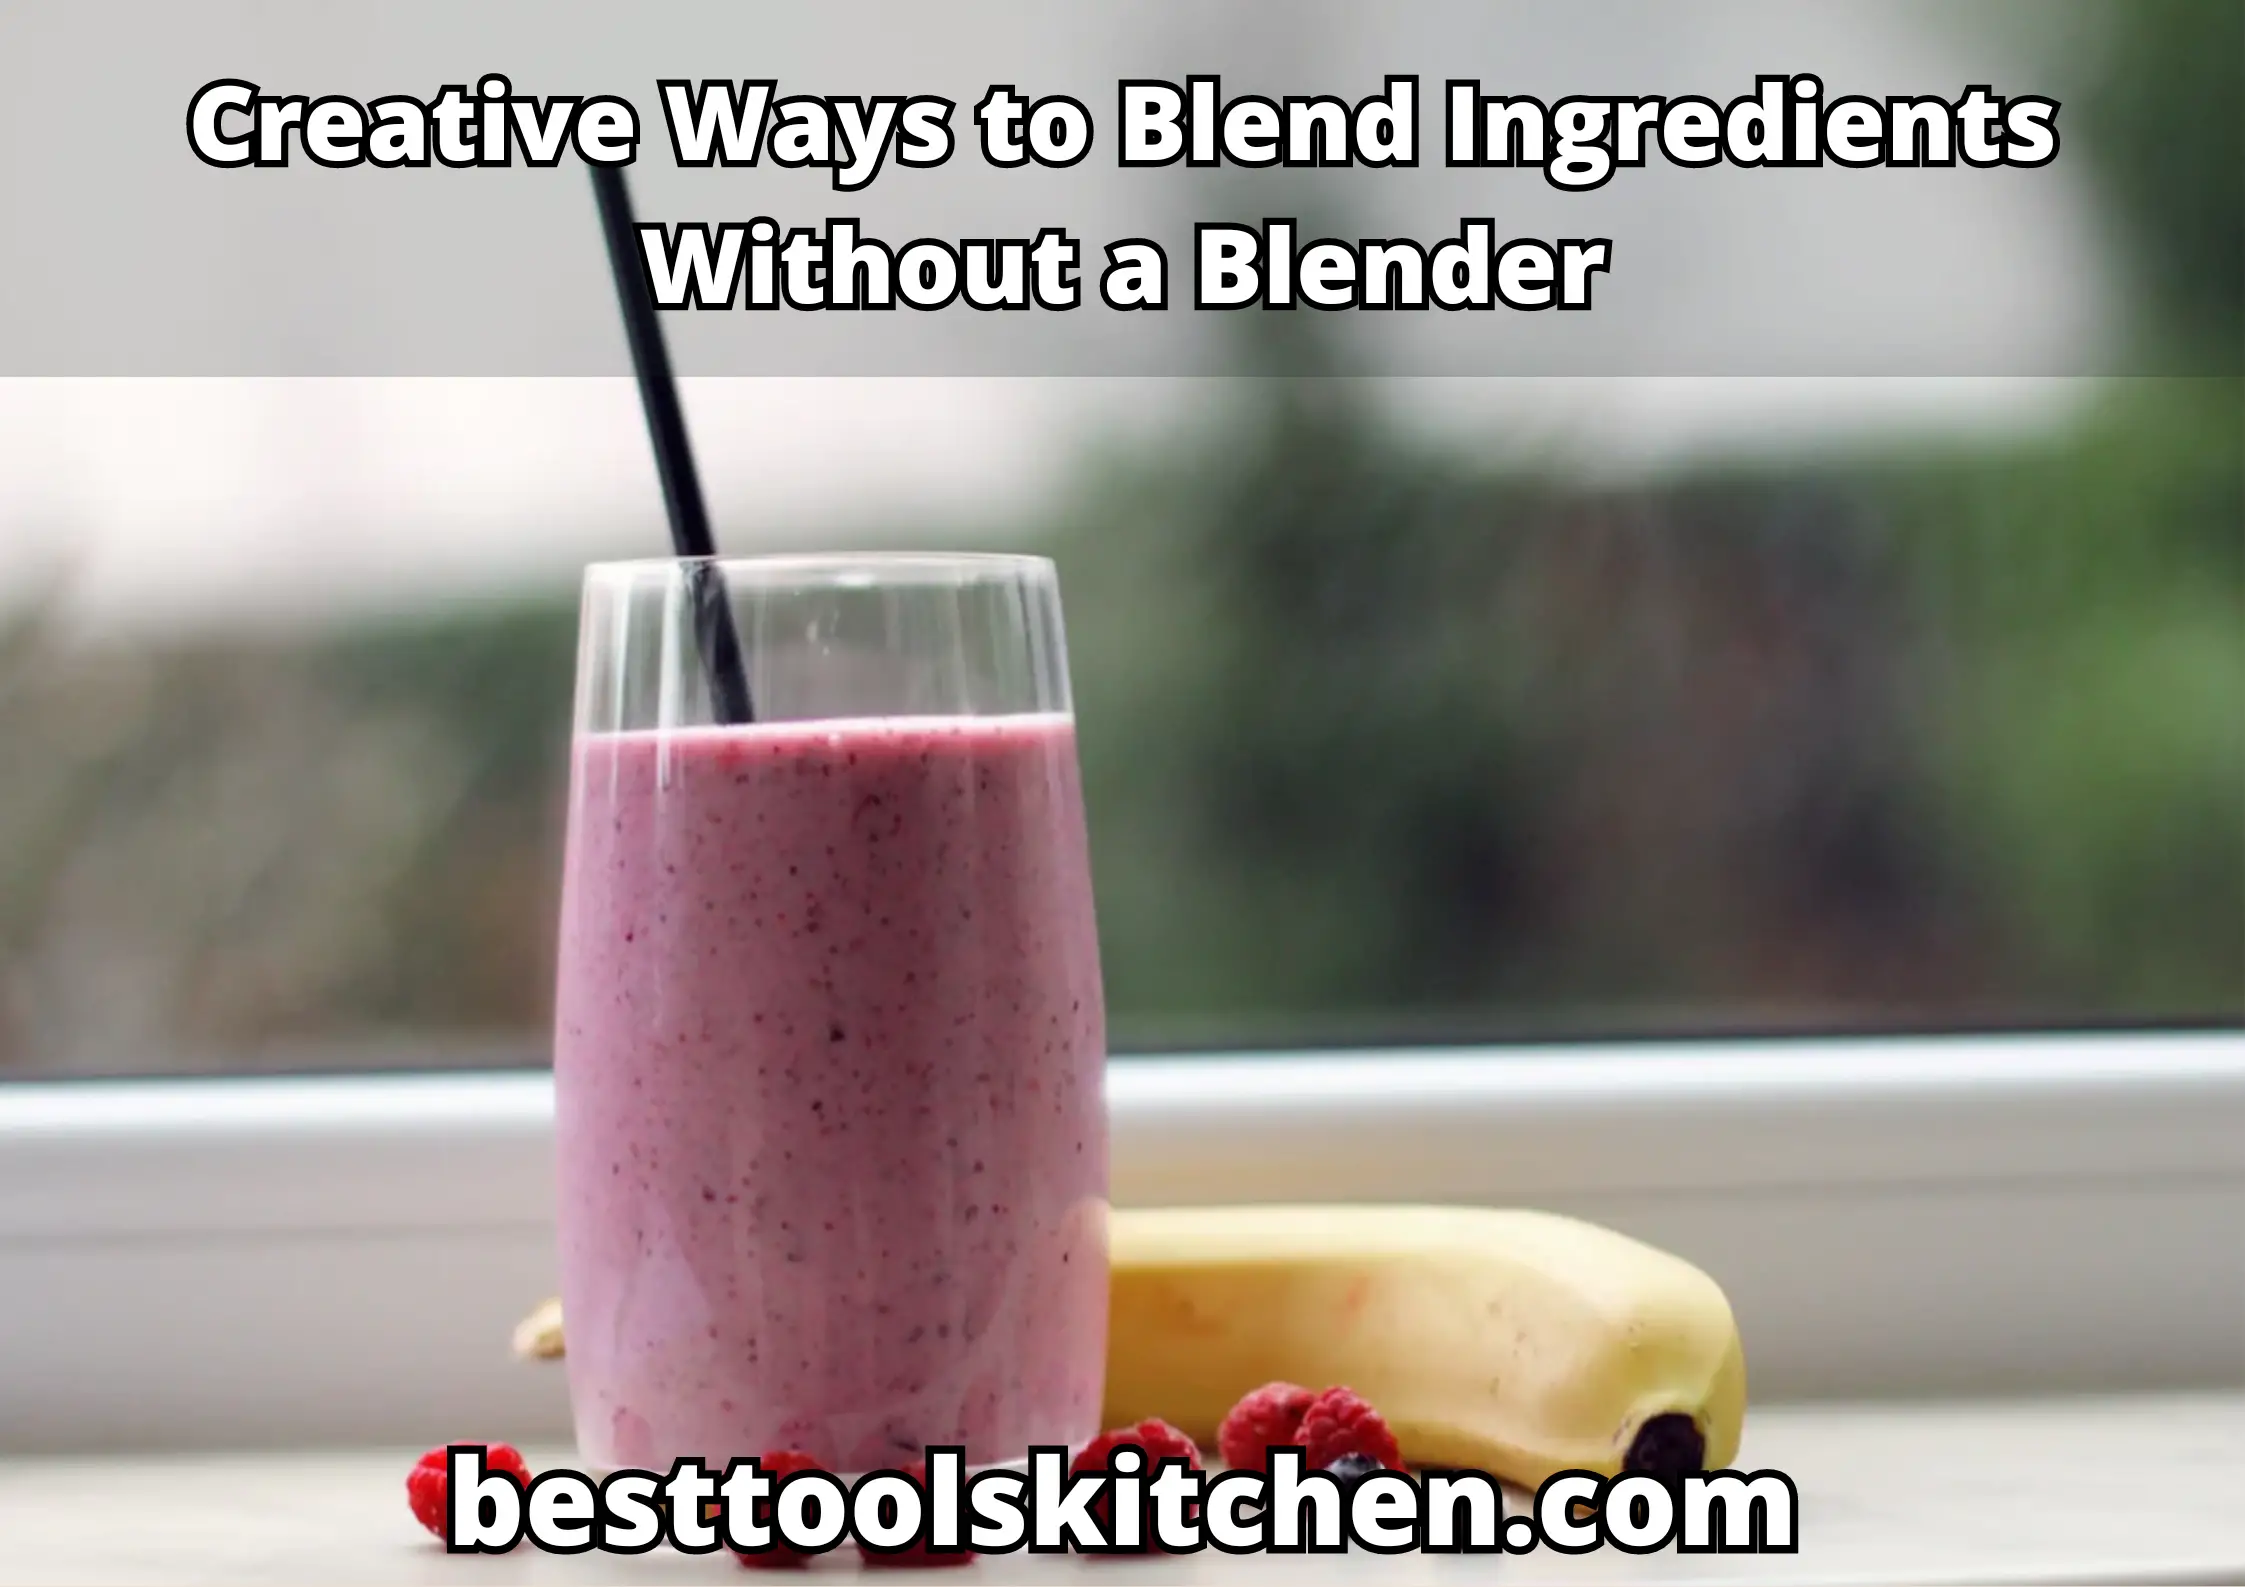 Creative Ways to Blend Ingredients Without a Blender